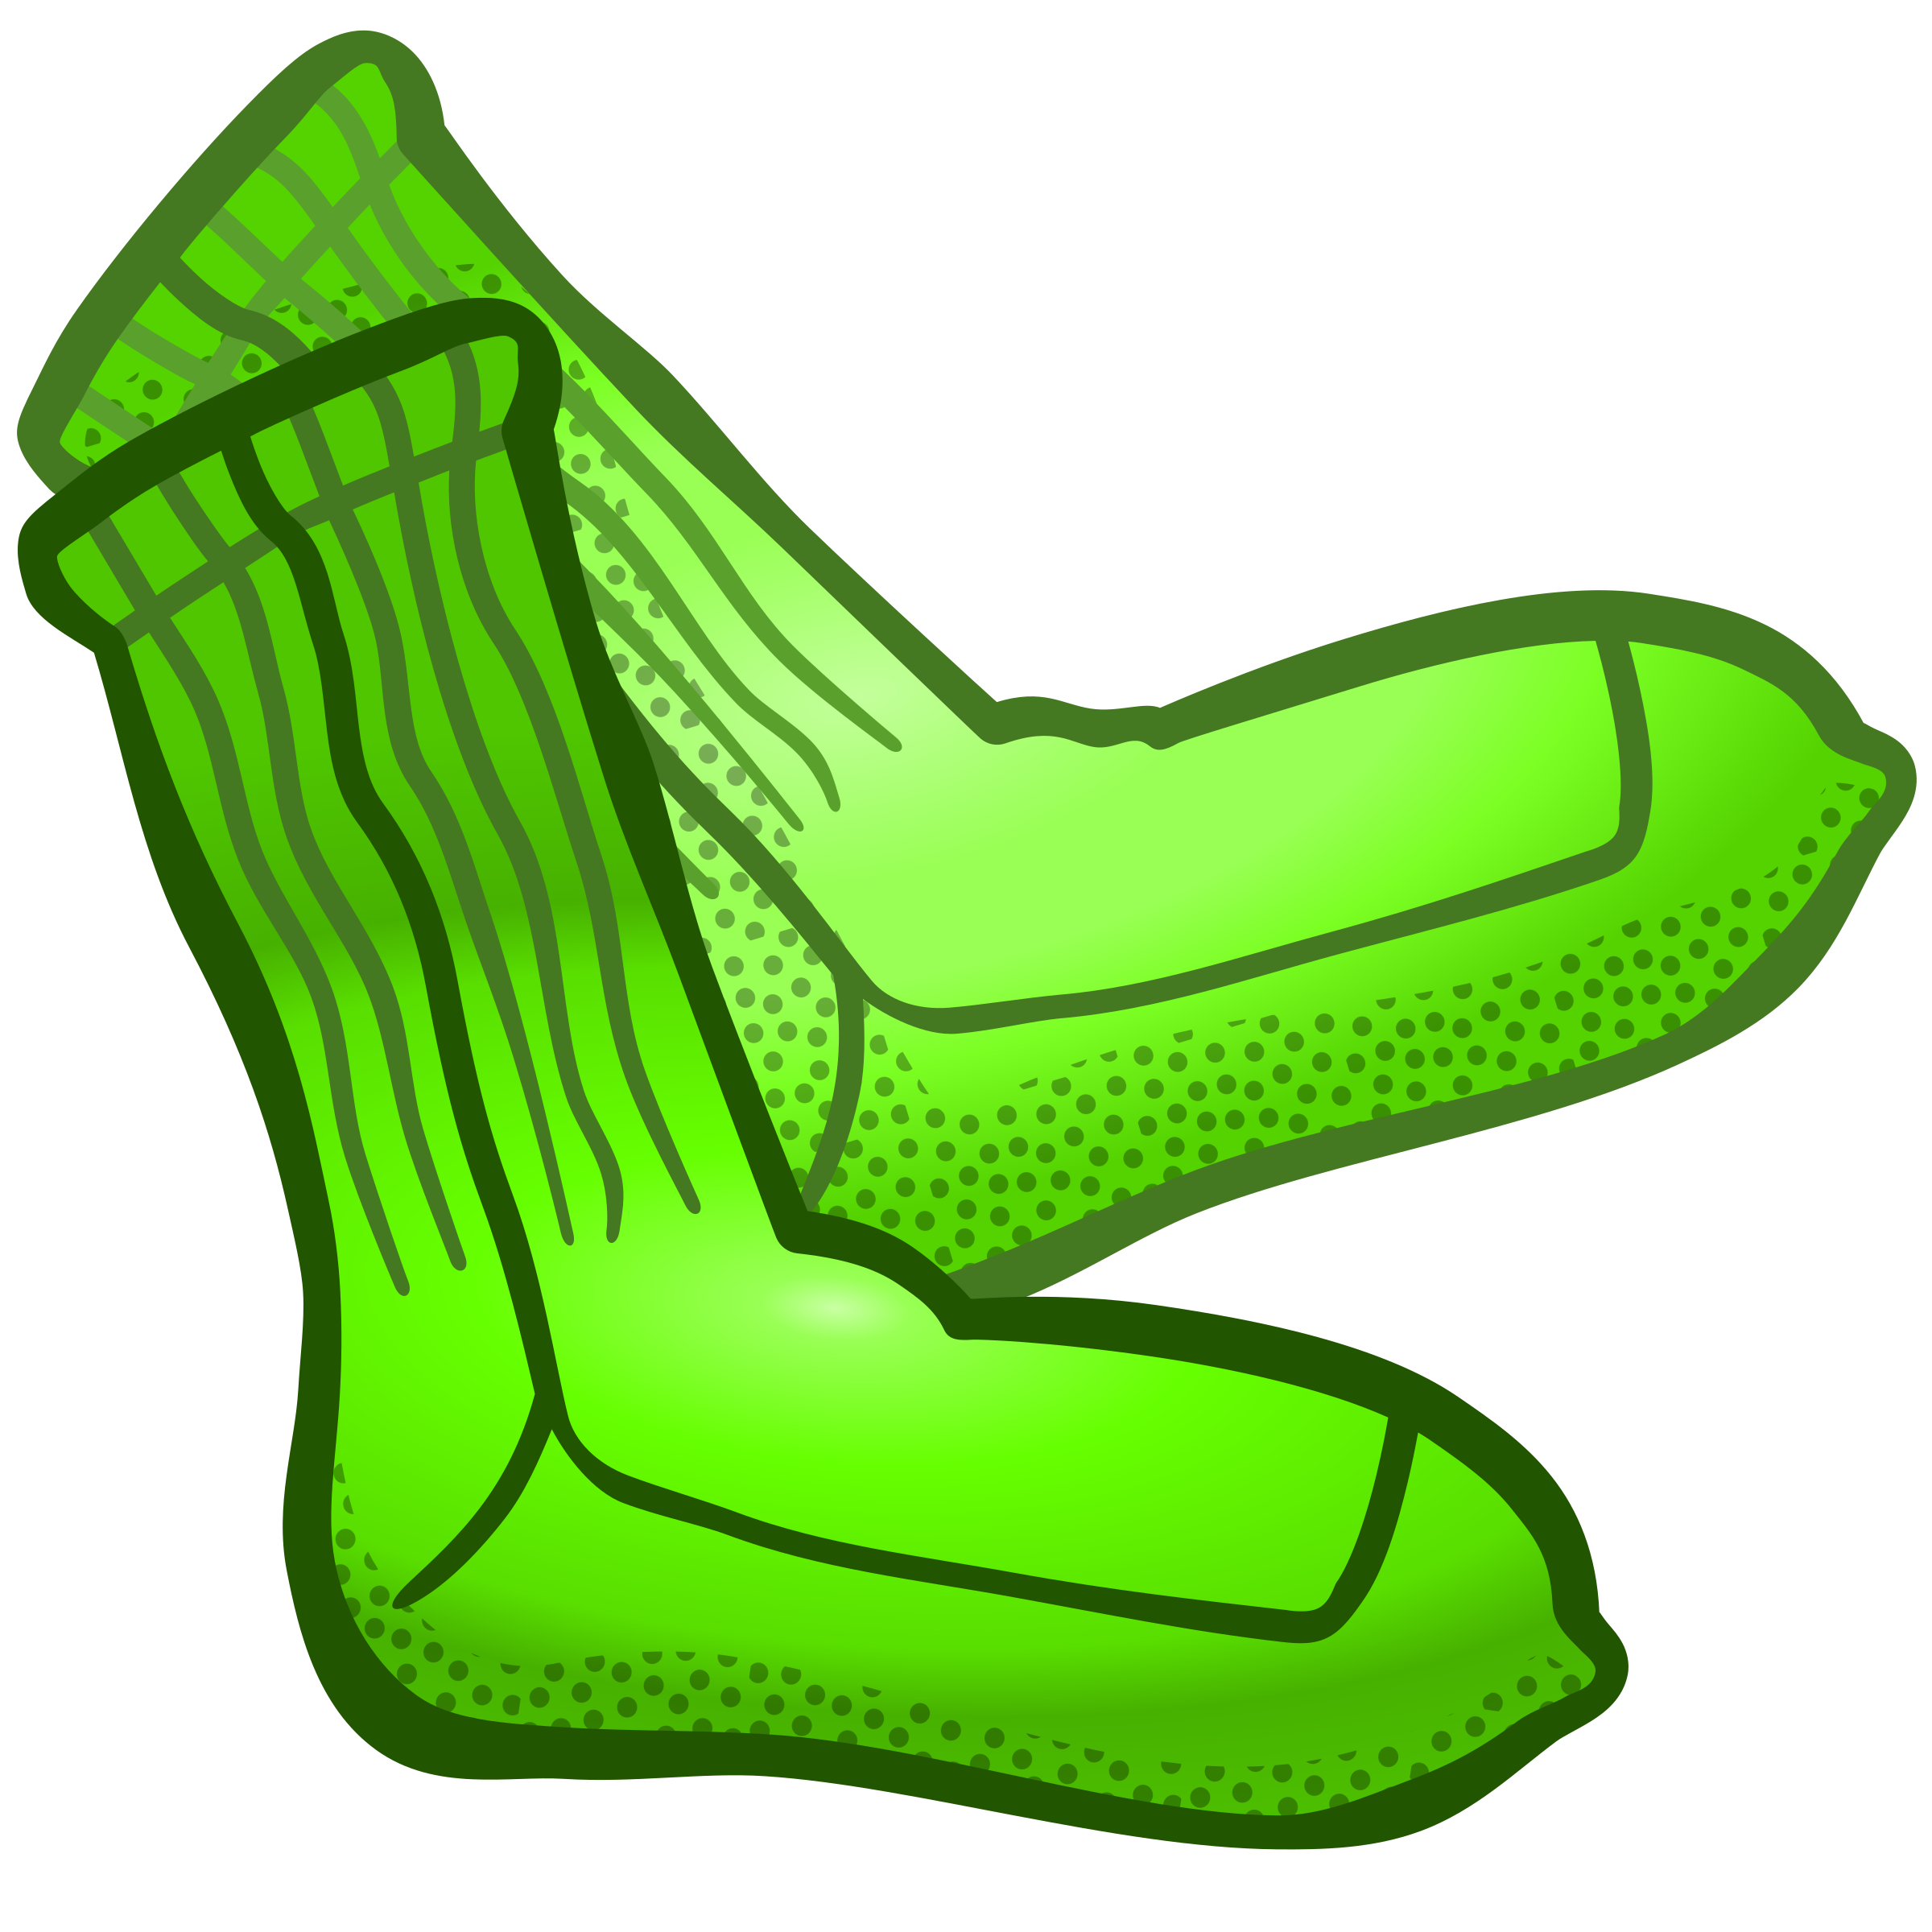 Coloured icons png free. Clipart socks long sock